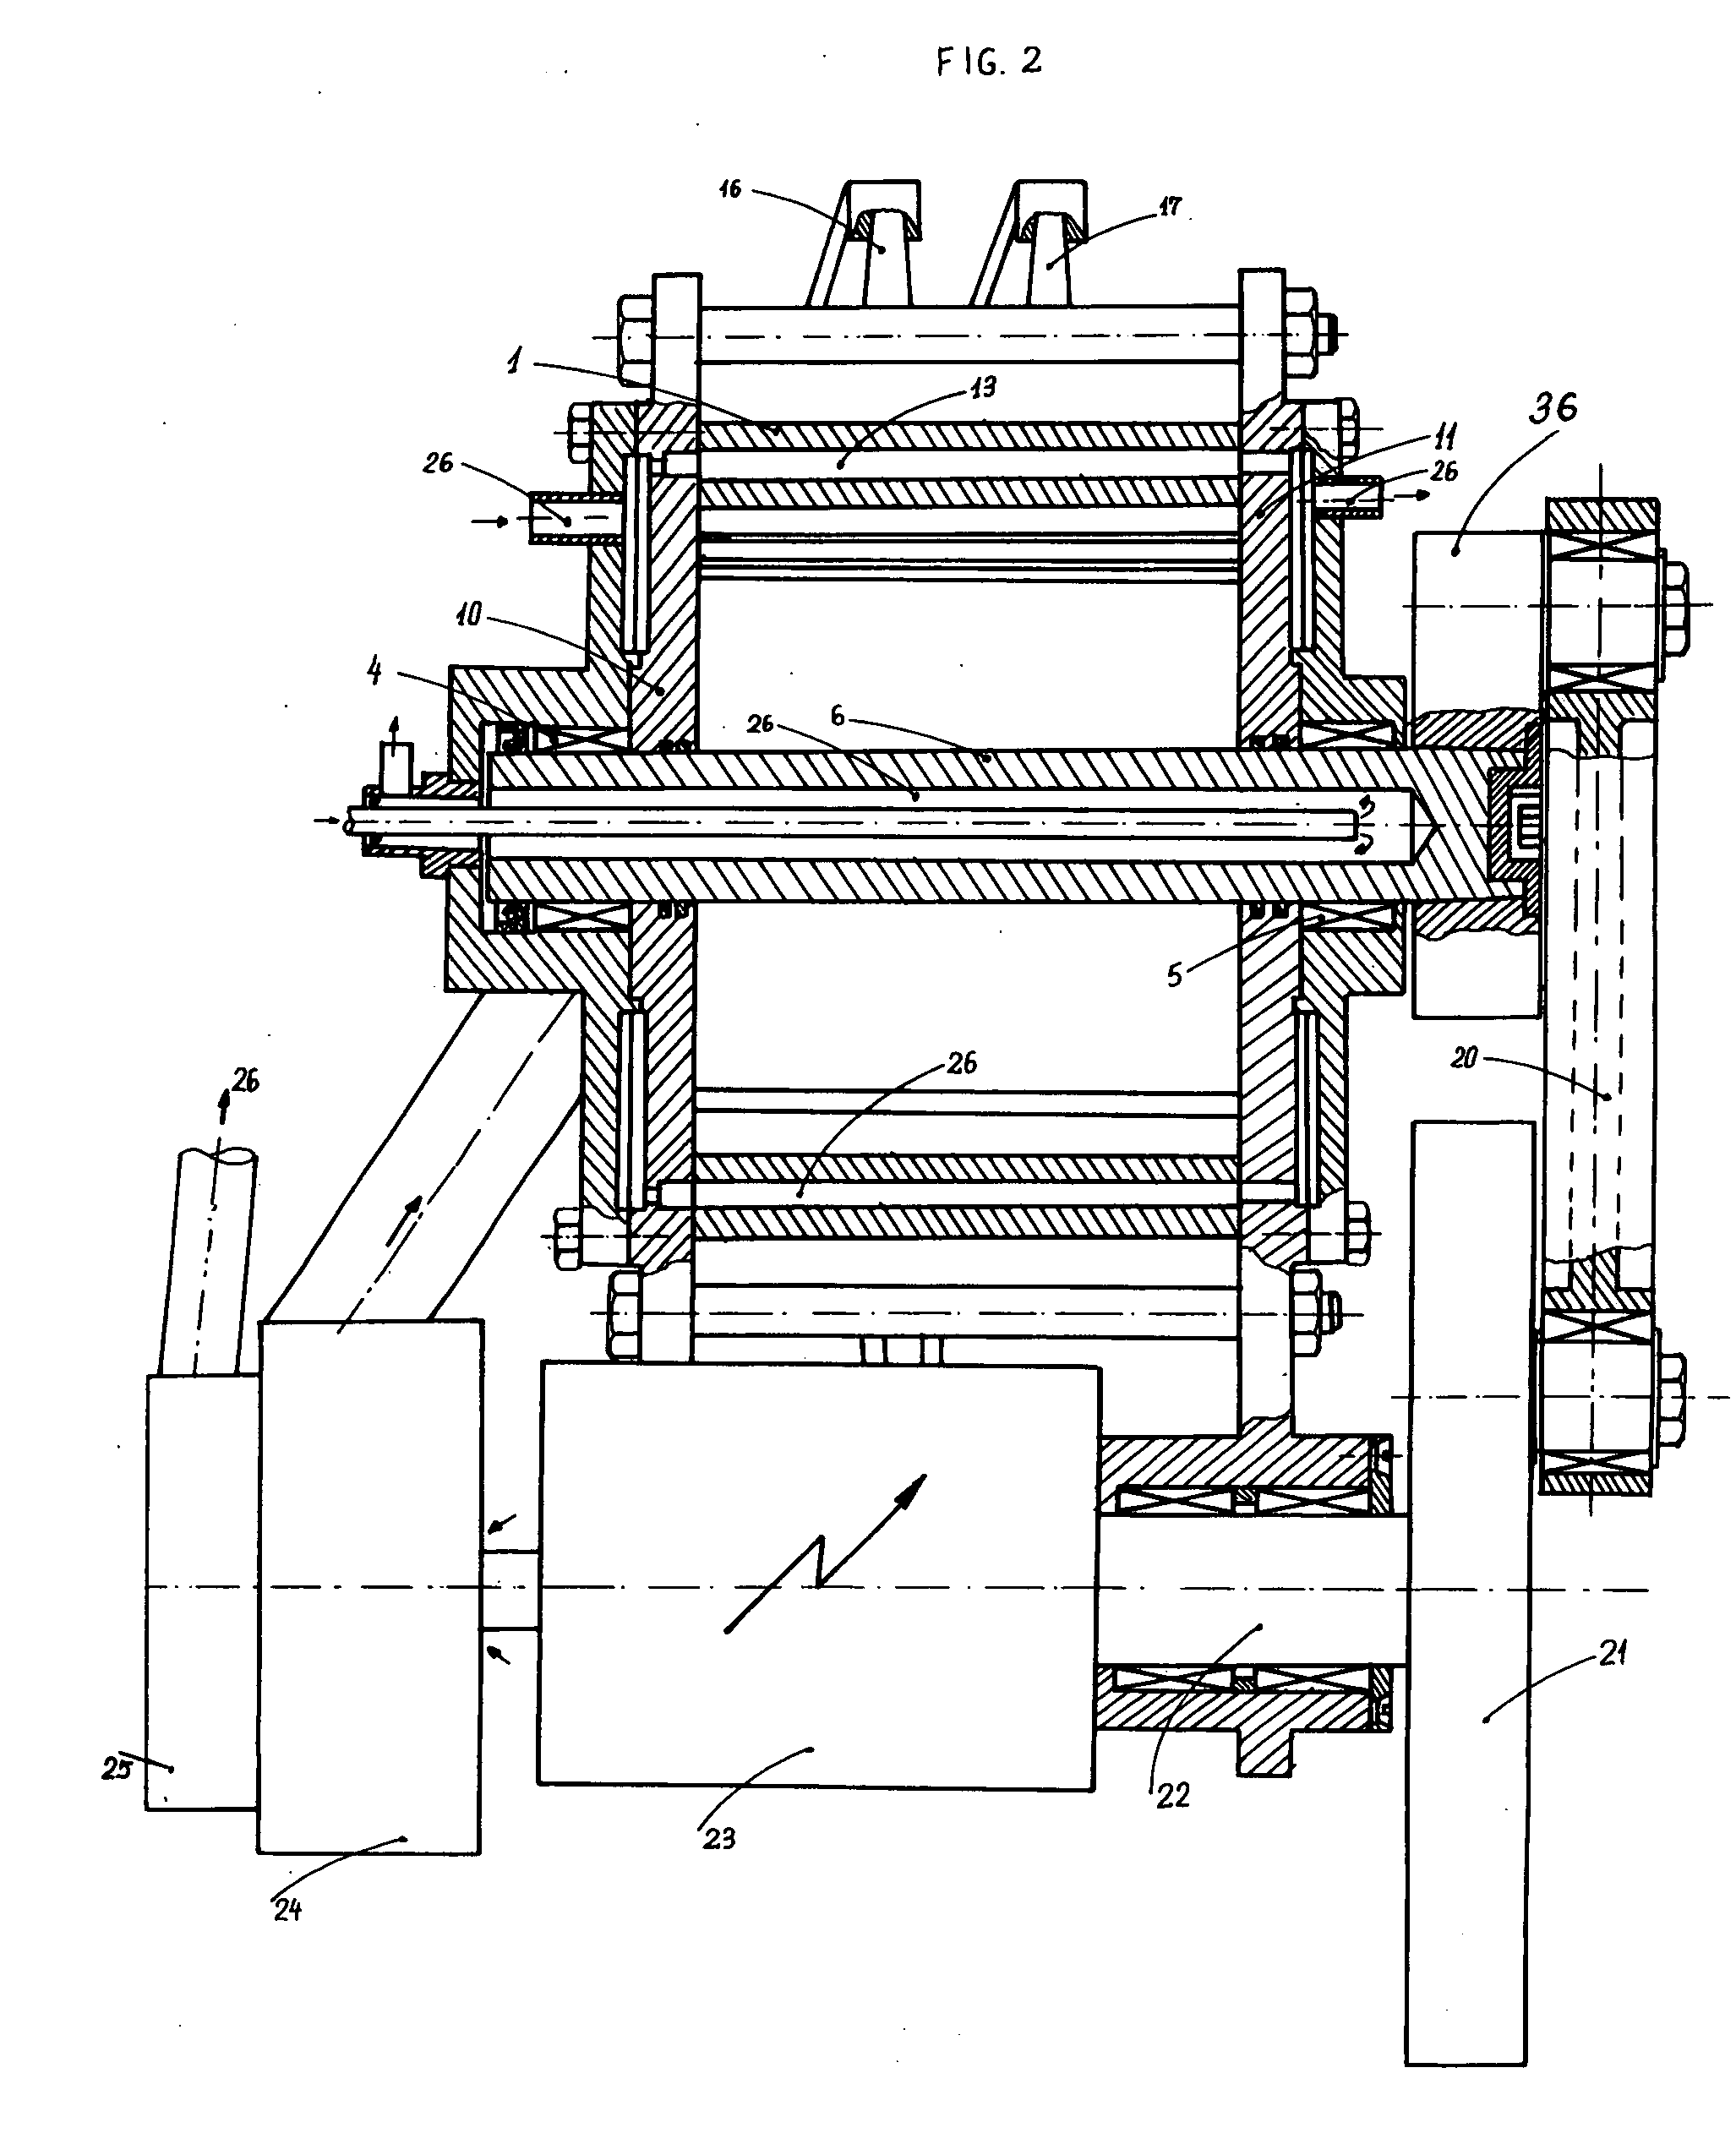 Rotary internal combustion engine with adjustable compression stroke